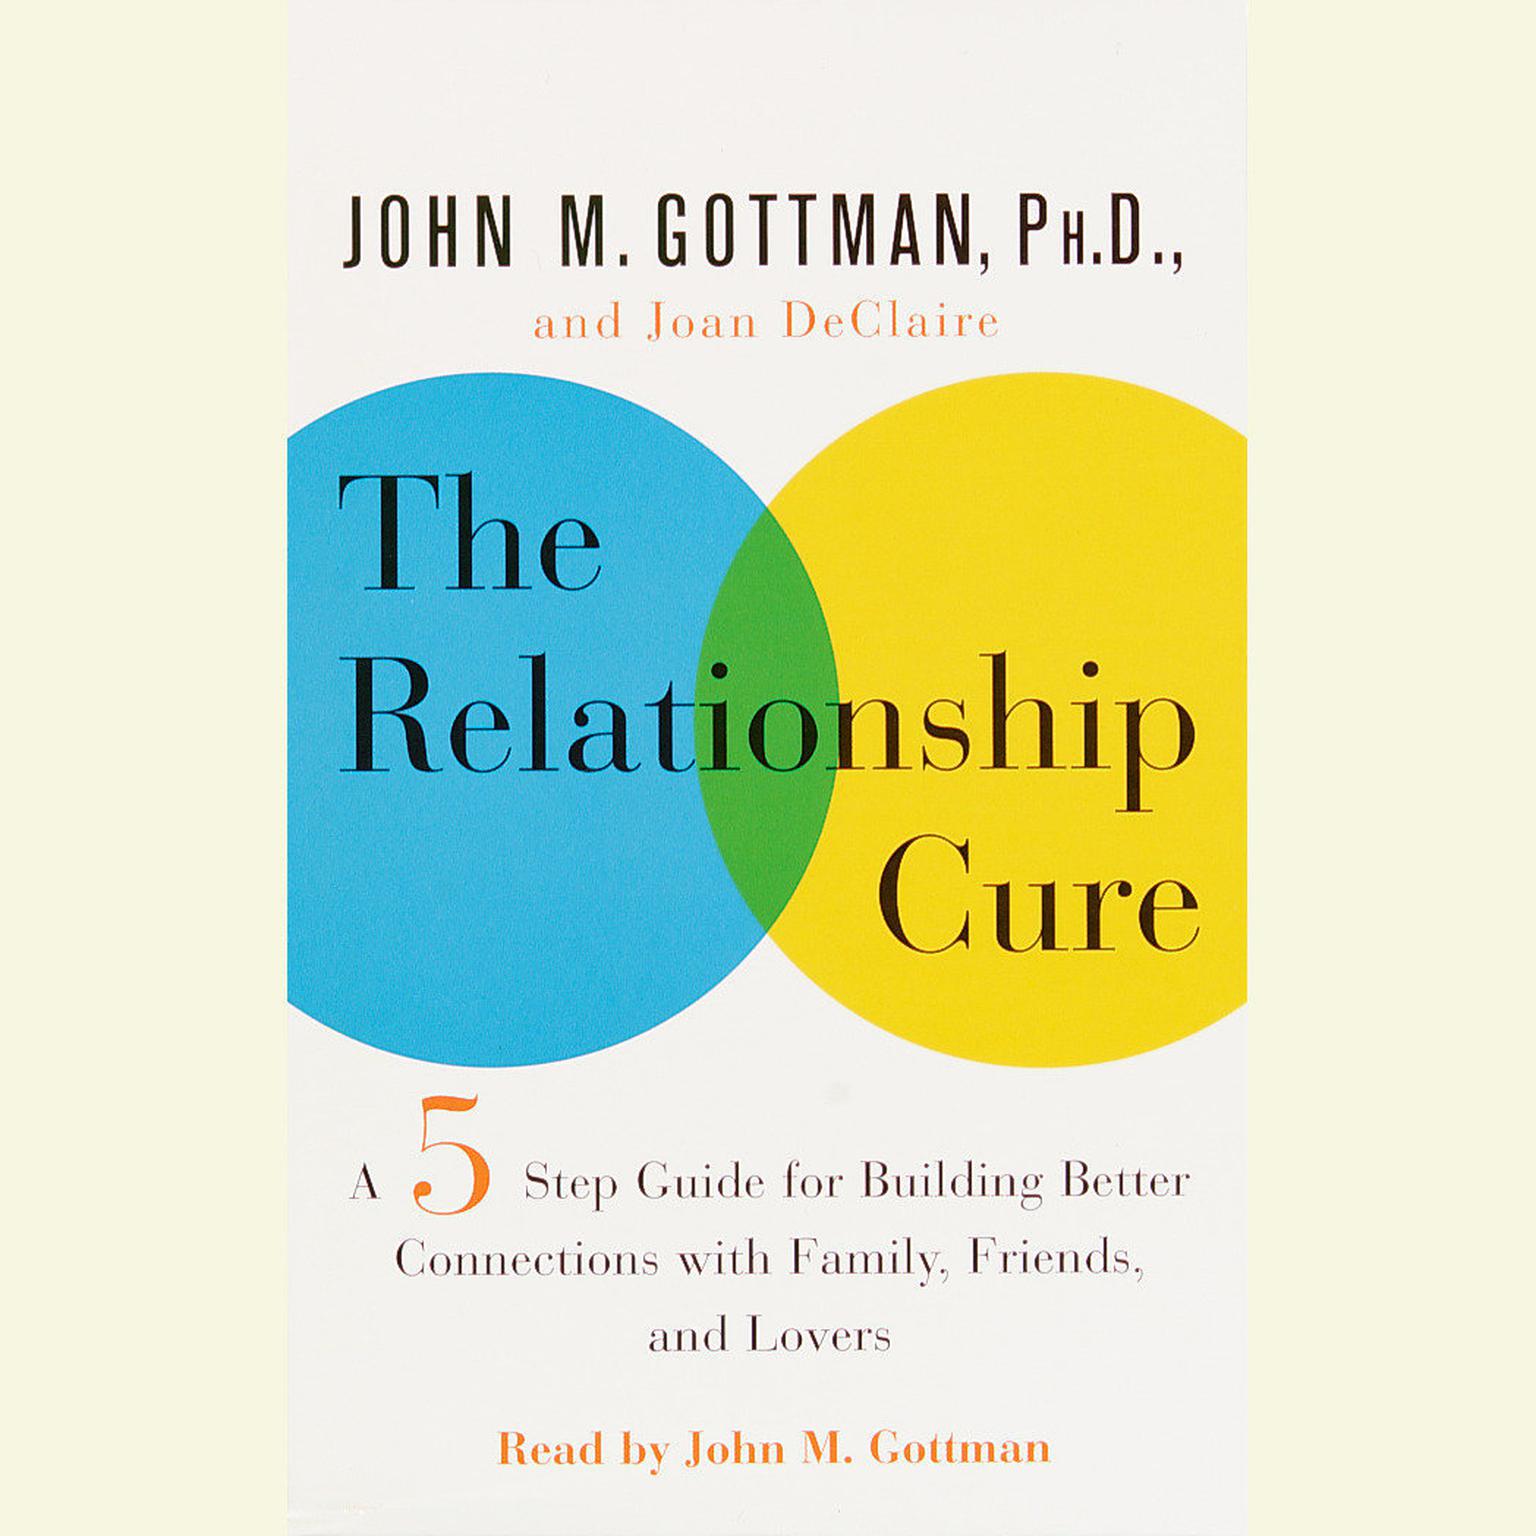 The Relationship Cure (Abridged): A 5 Step Guide to Strengthening Your Marriage, Family, and Friendships Audiobook, by Joan DeClaire